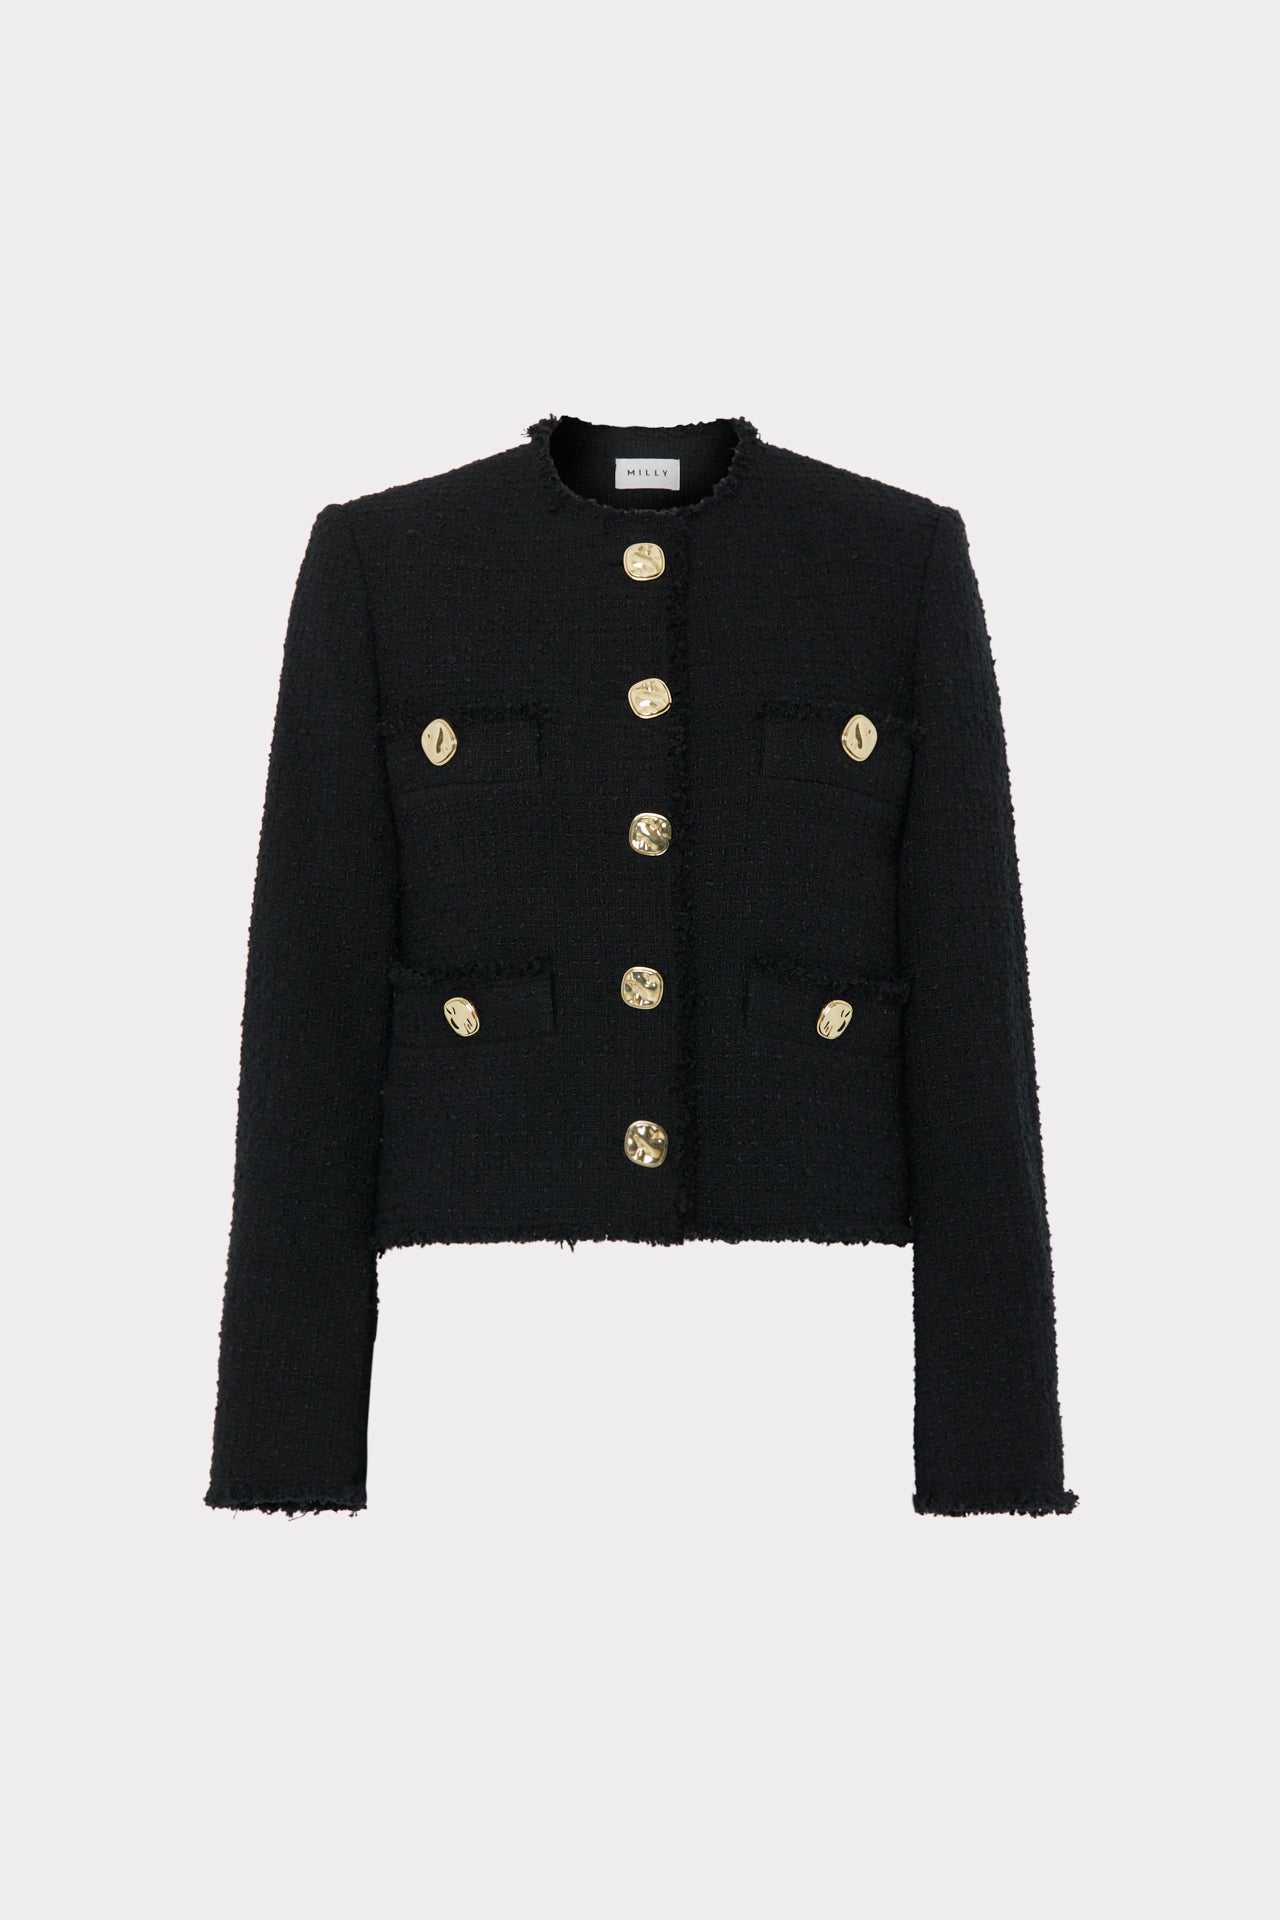 Reign Boucle Jacket in Black - MILLY in Black | MILLY